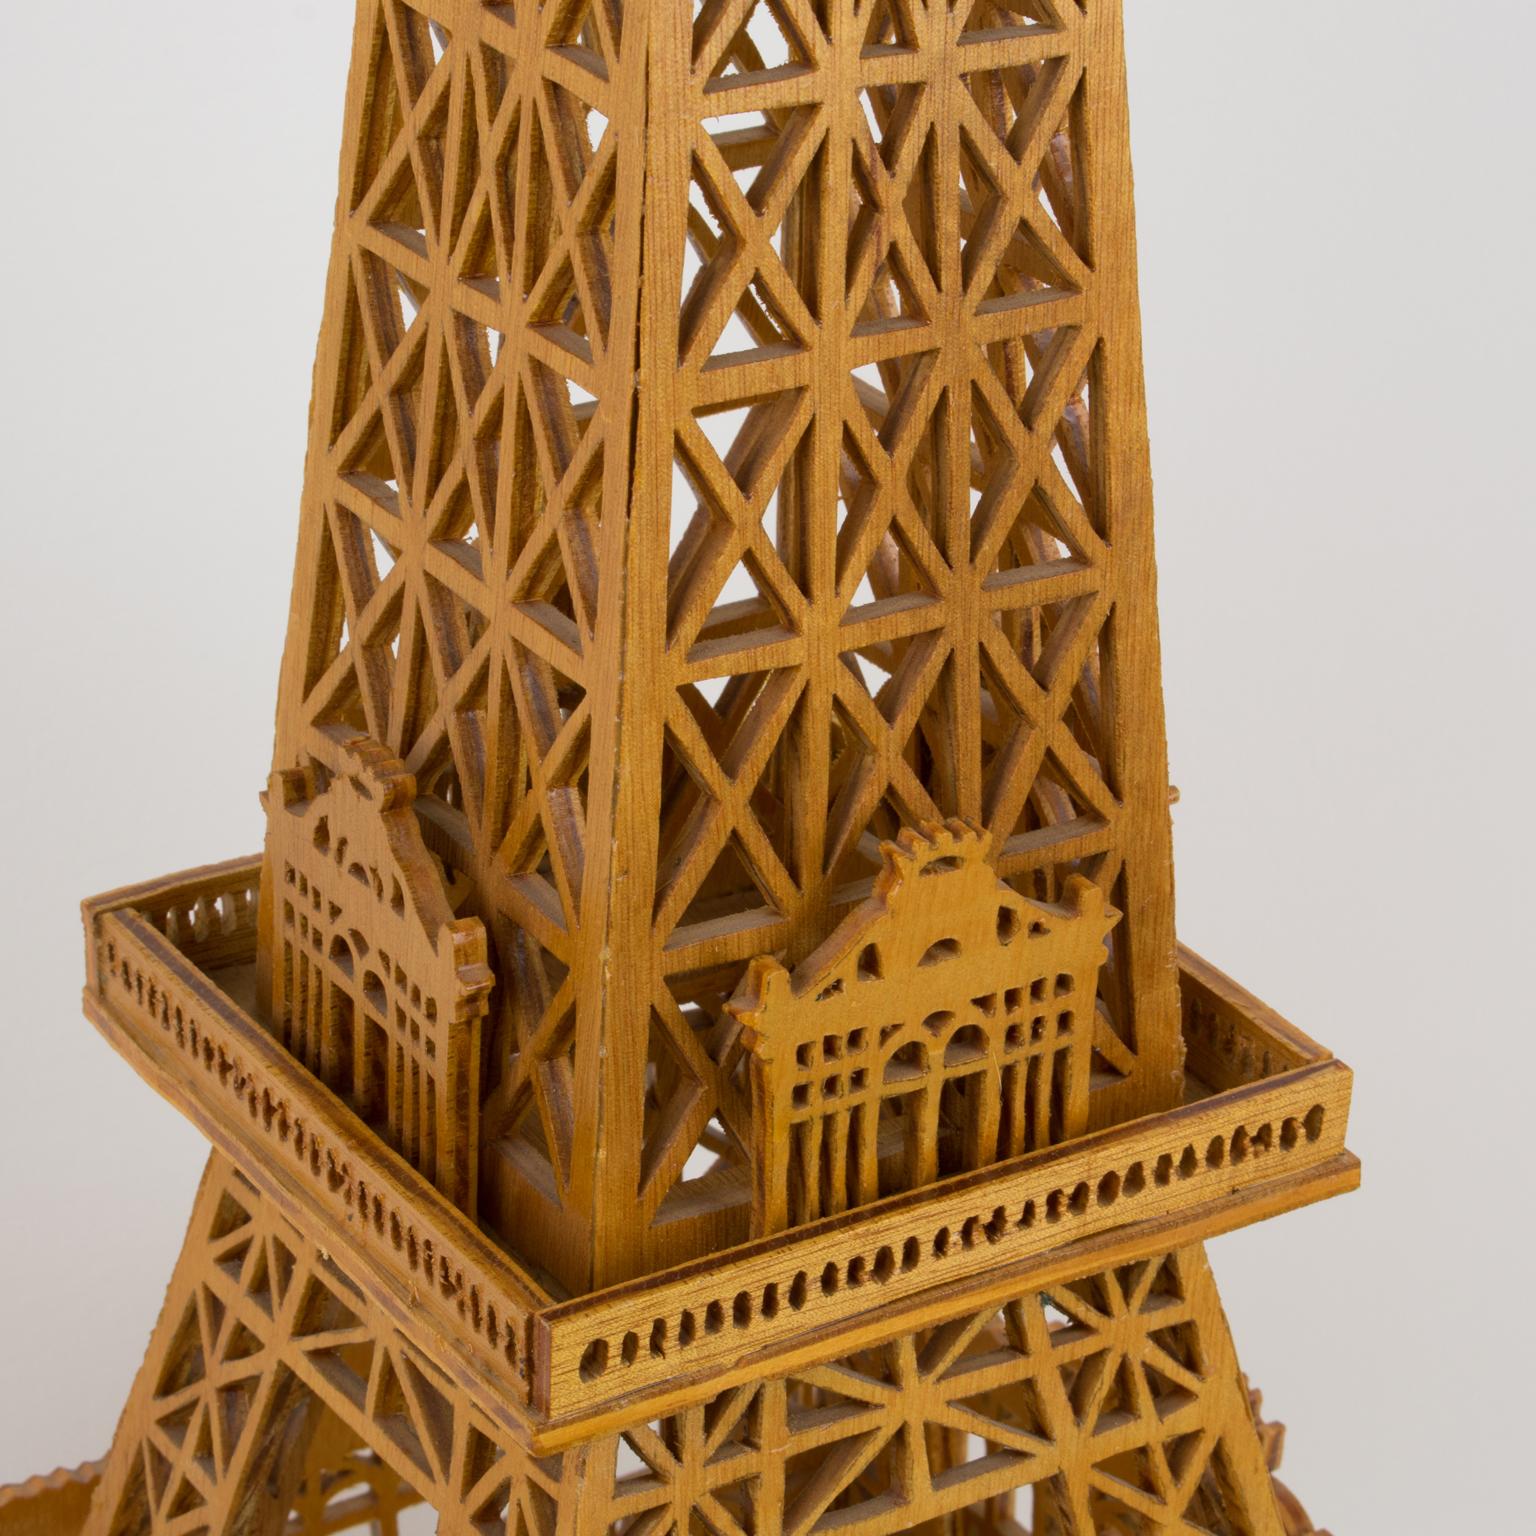 French Hand-Carved Wooden Eiffel Tower Model Miniature Sculpture 12